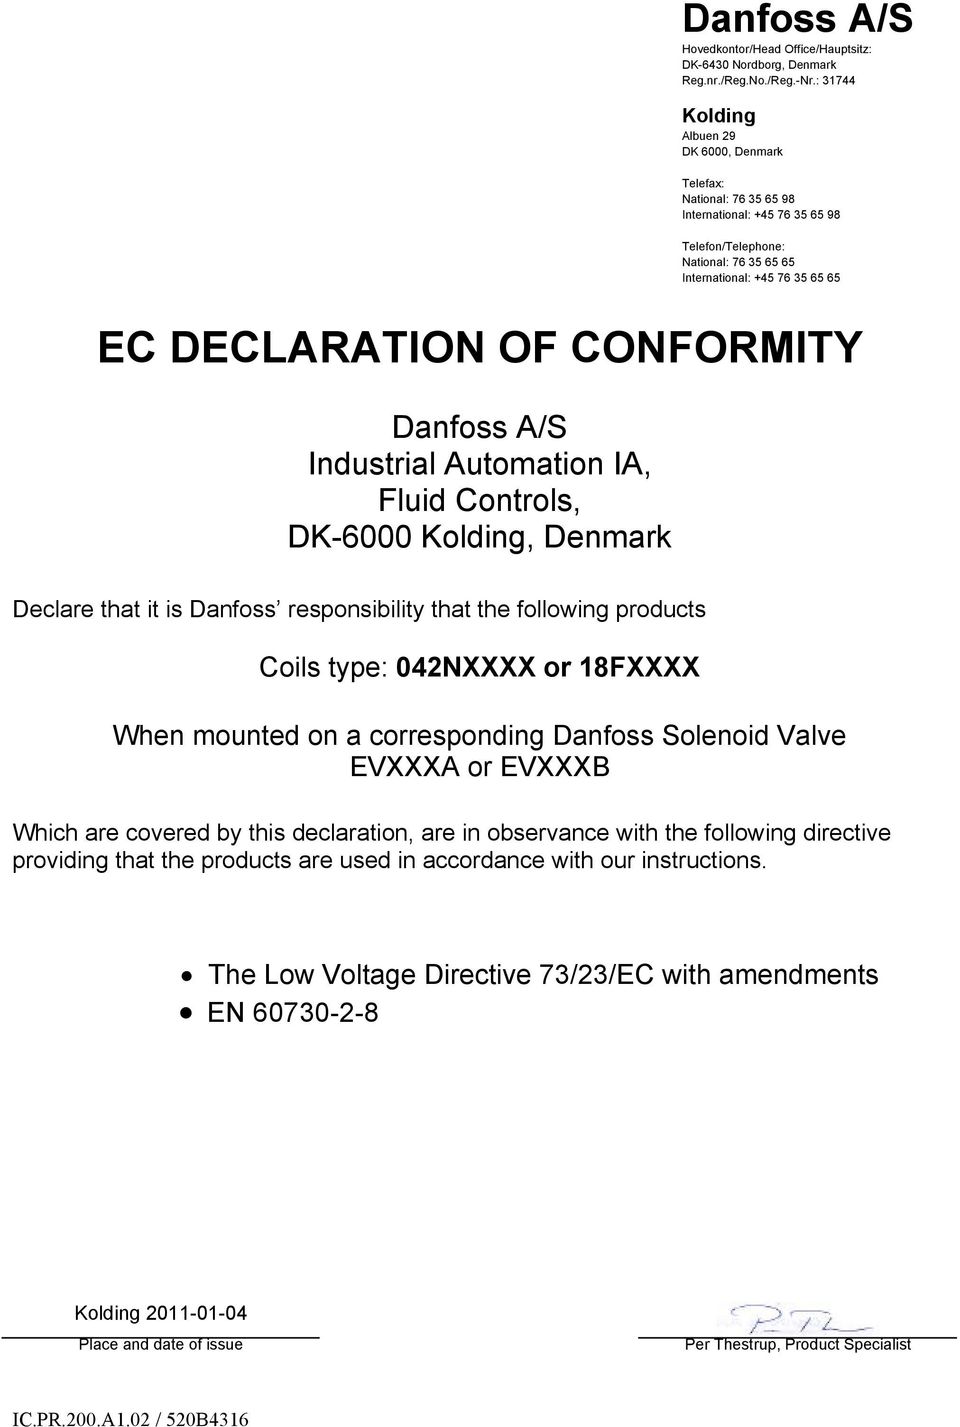 Industrial Automation IA, Fluid Controls, DK-6000, Denmark Declare that it is Danfoss responsibility that the following products Coils type: 042NXXXX or 18FXXXX When mounted on a corresponding